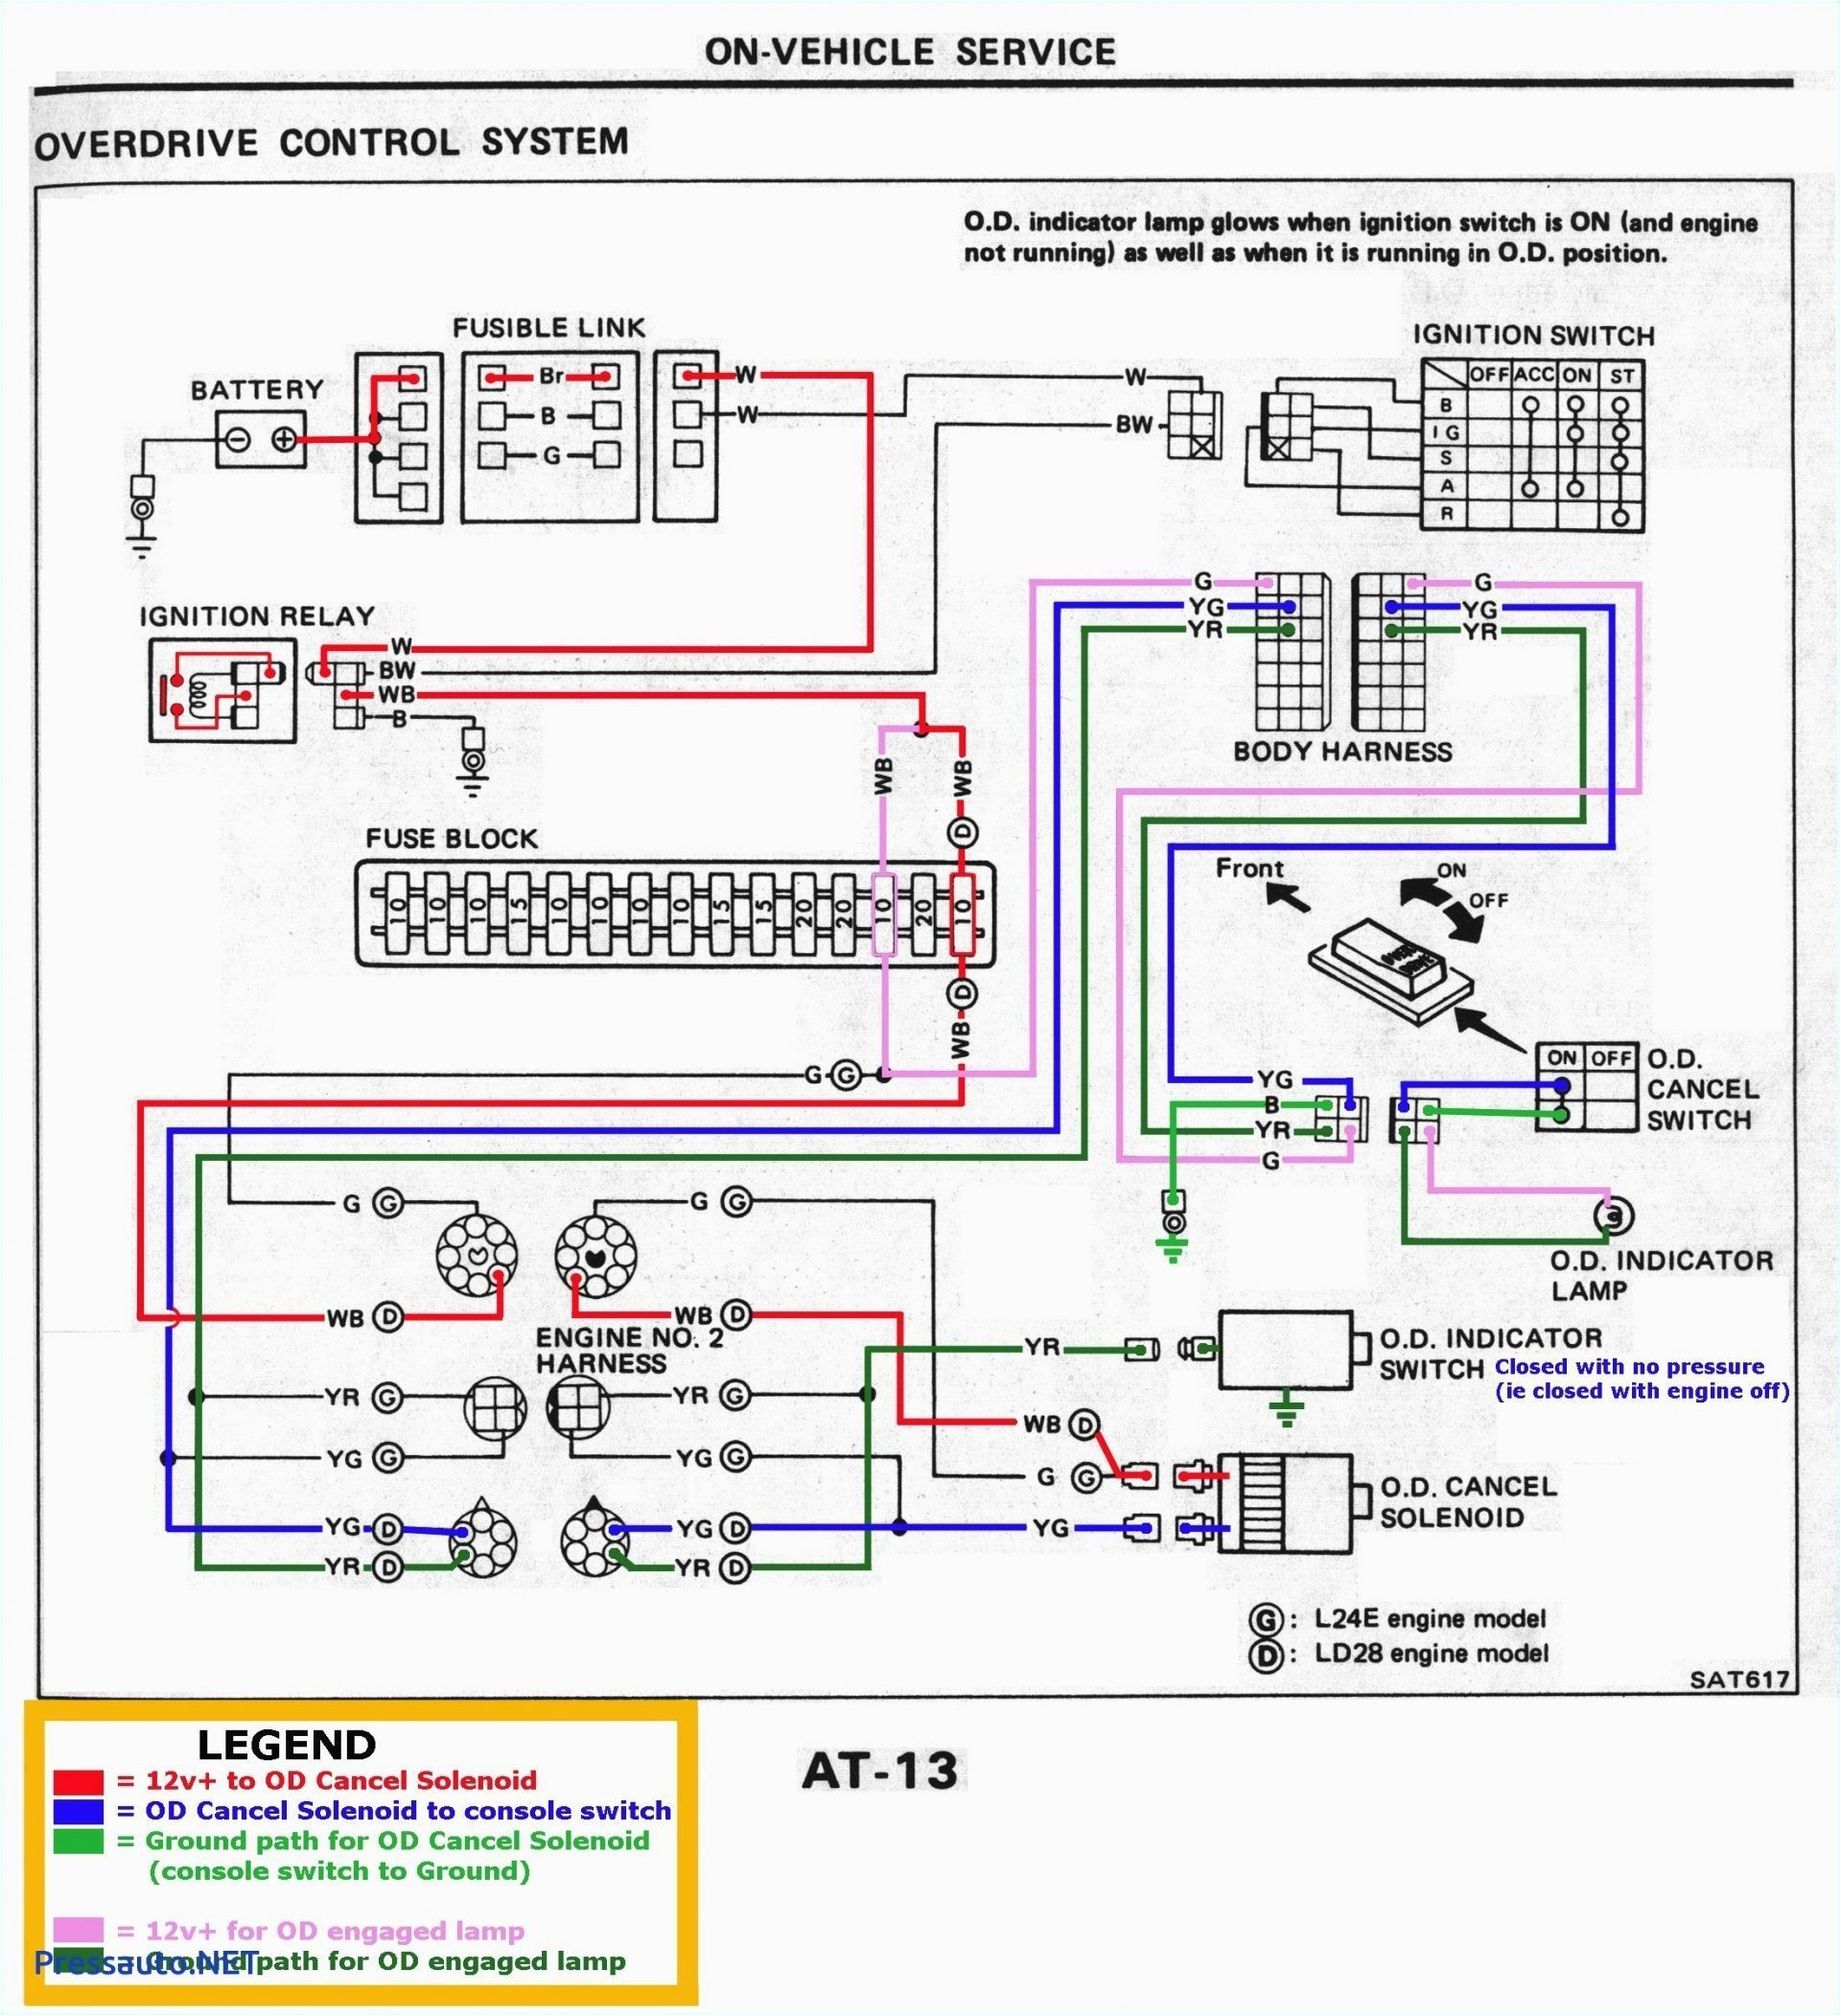 wiring diagram furthermore wiring harness diagram likewise diagrams wiring diagram likewise 2012 chevy cruze further 1997 chevy cavalier